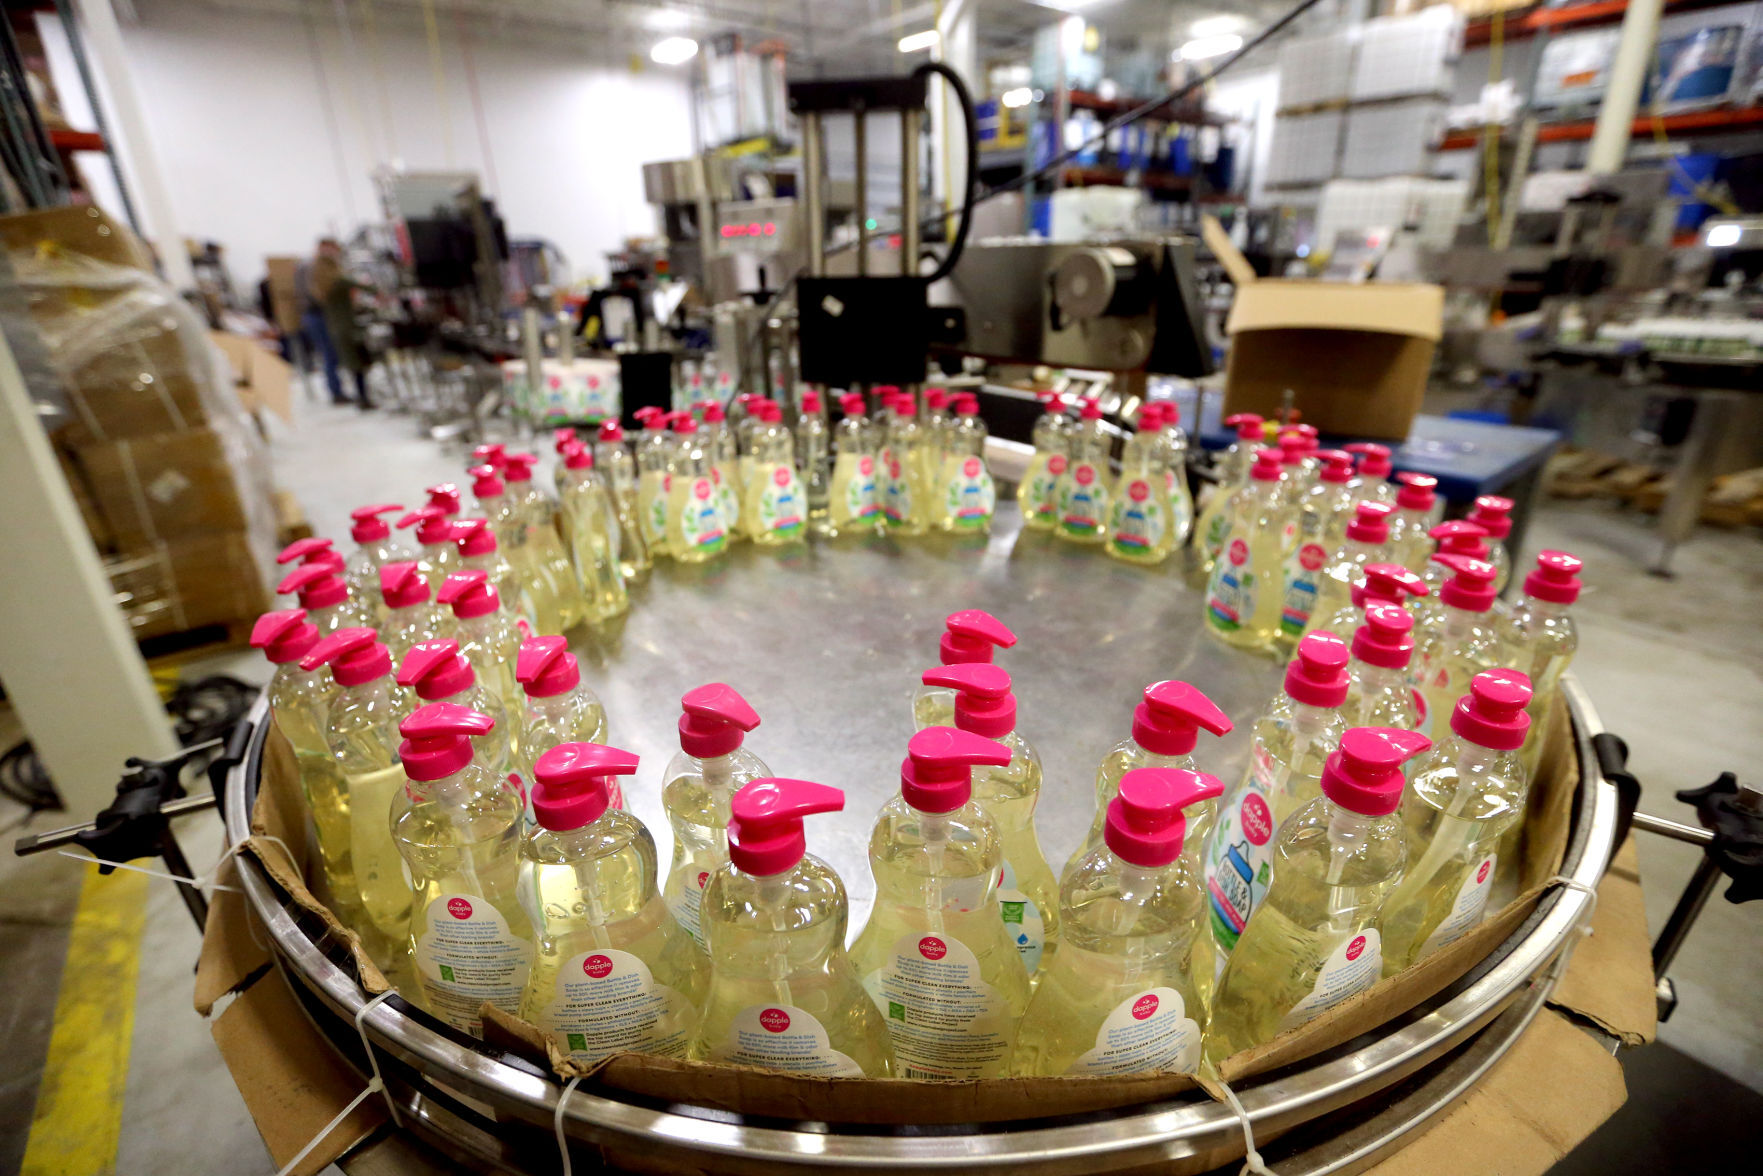 Products sit before being packaged at Higley Industries in Dyersville, Iowa, on Monday, Feb. 14, 2022.    PHOTO CREDIT: JESSICA REILLY